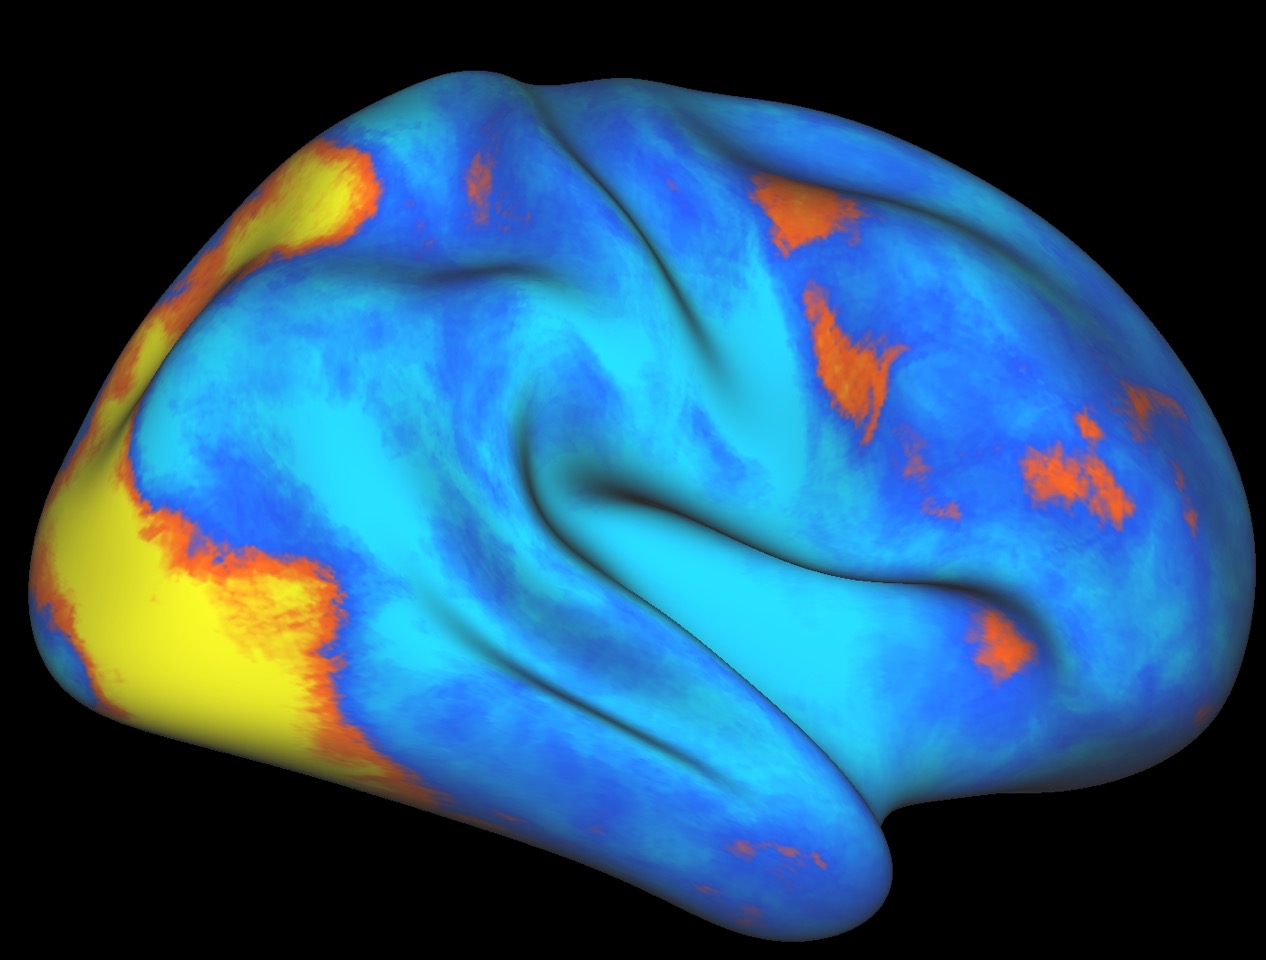 fMRI scan of human brain highlights areas involved in unique attention network